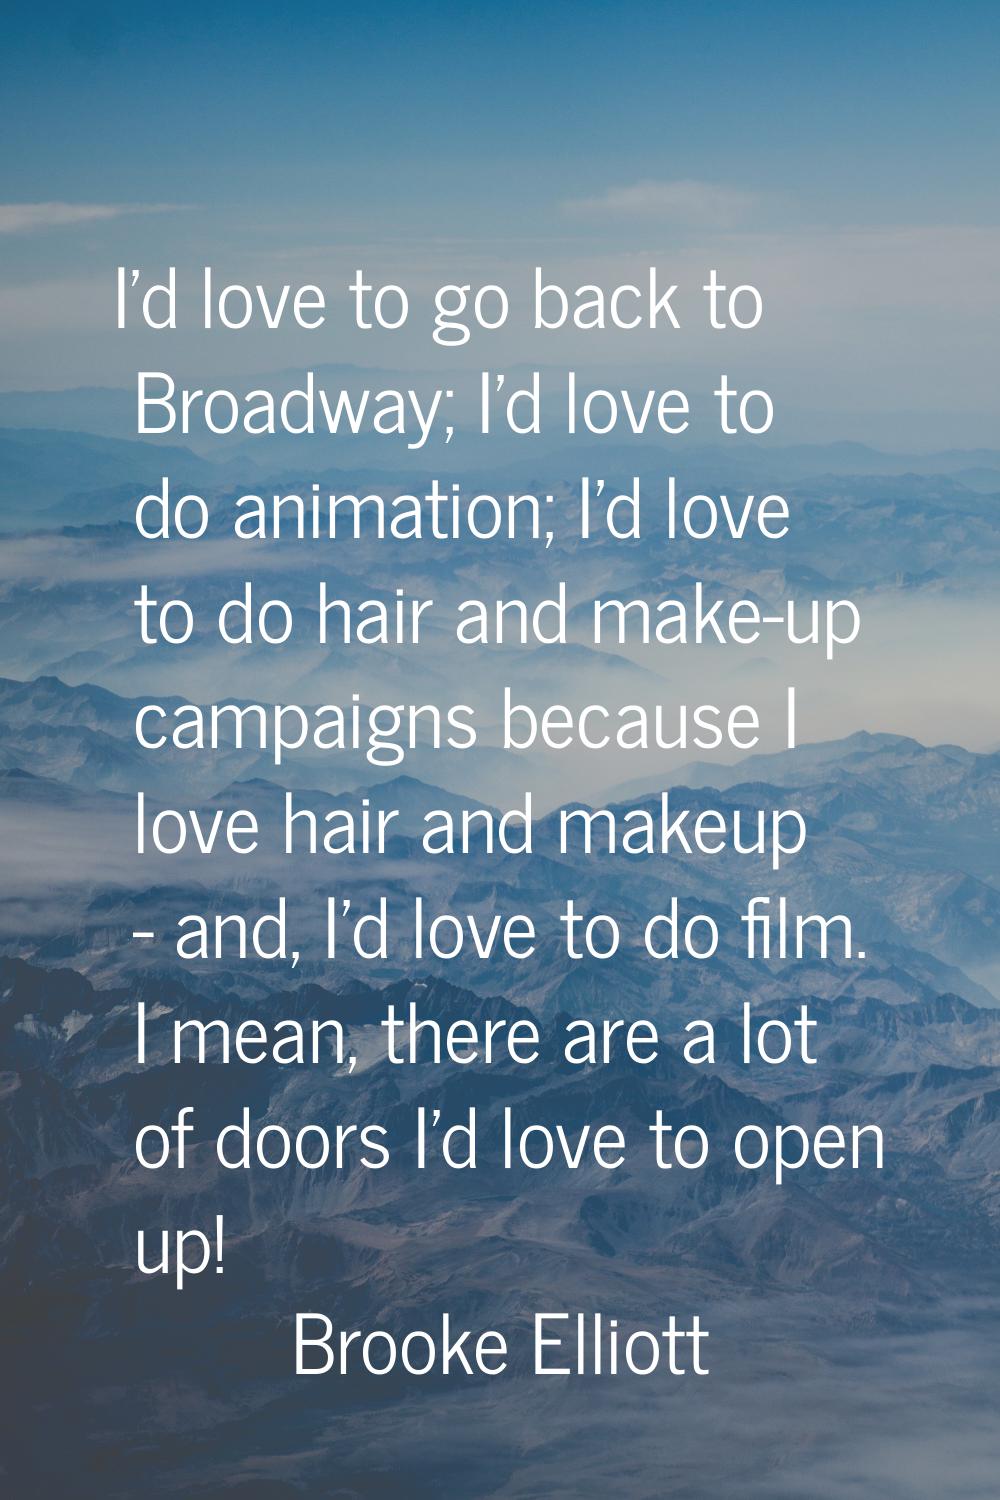 I'd love to go back to Broadway; I'd love to do animation; I'd love to do hair and make-up campaign